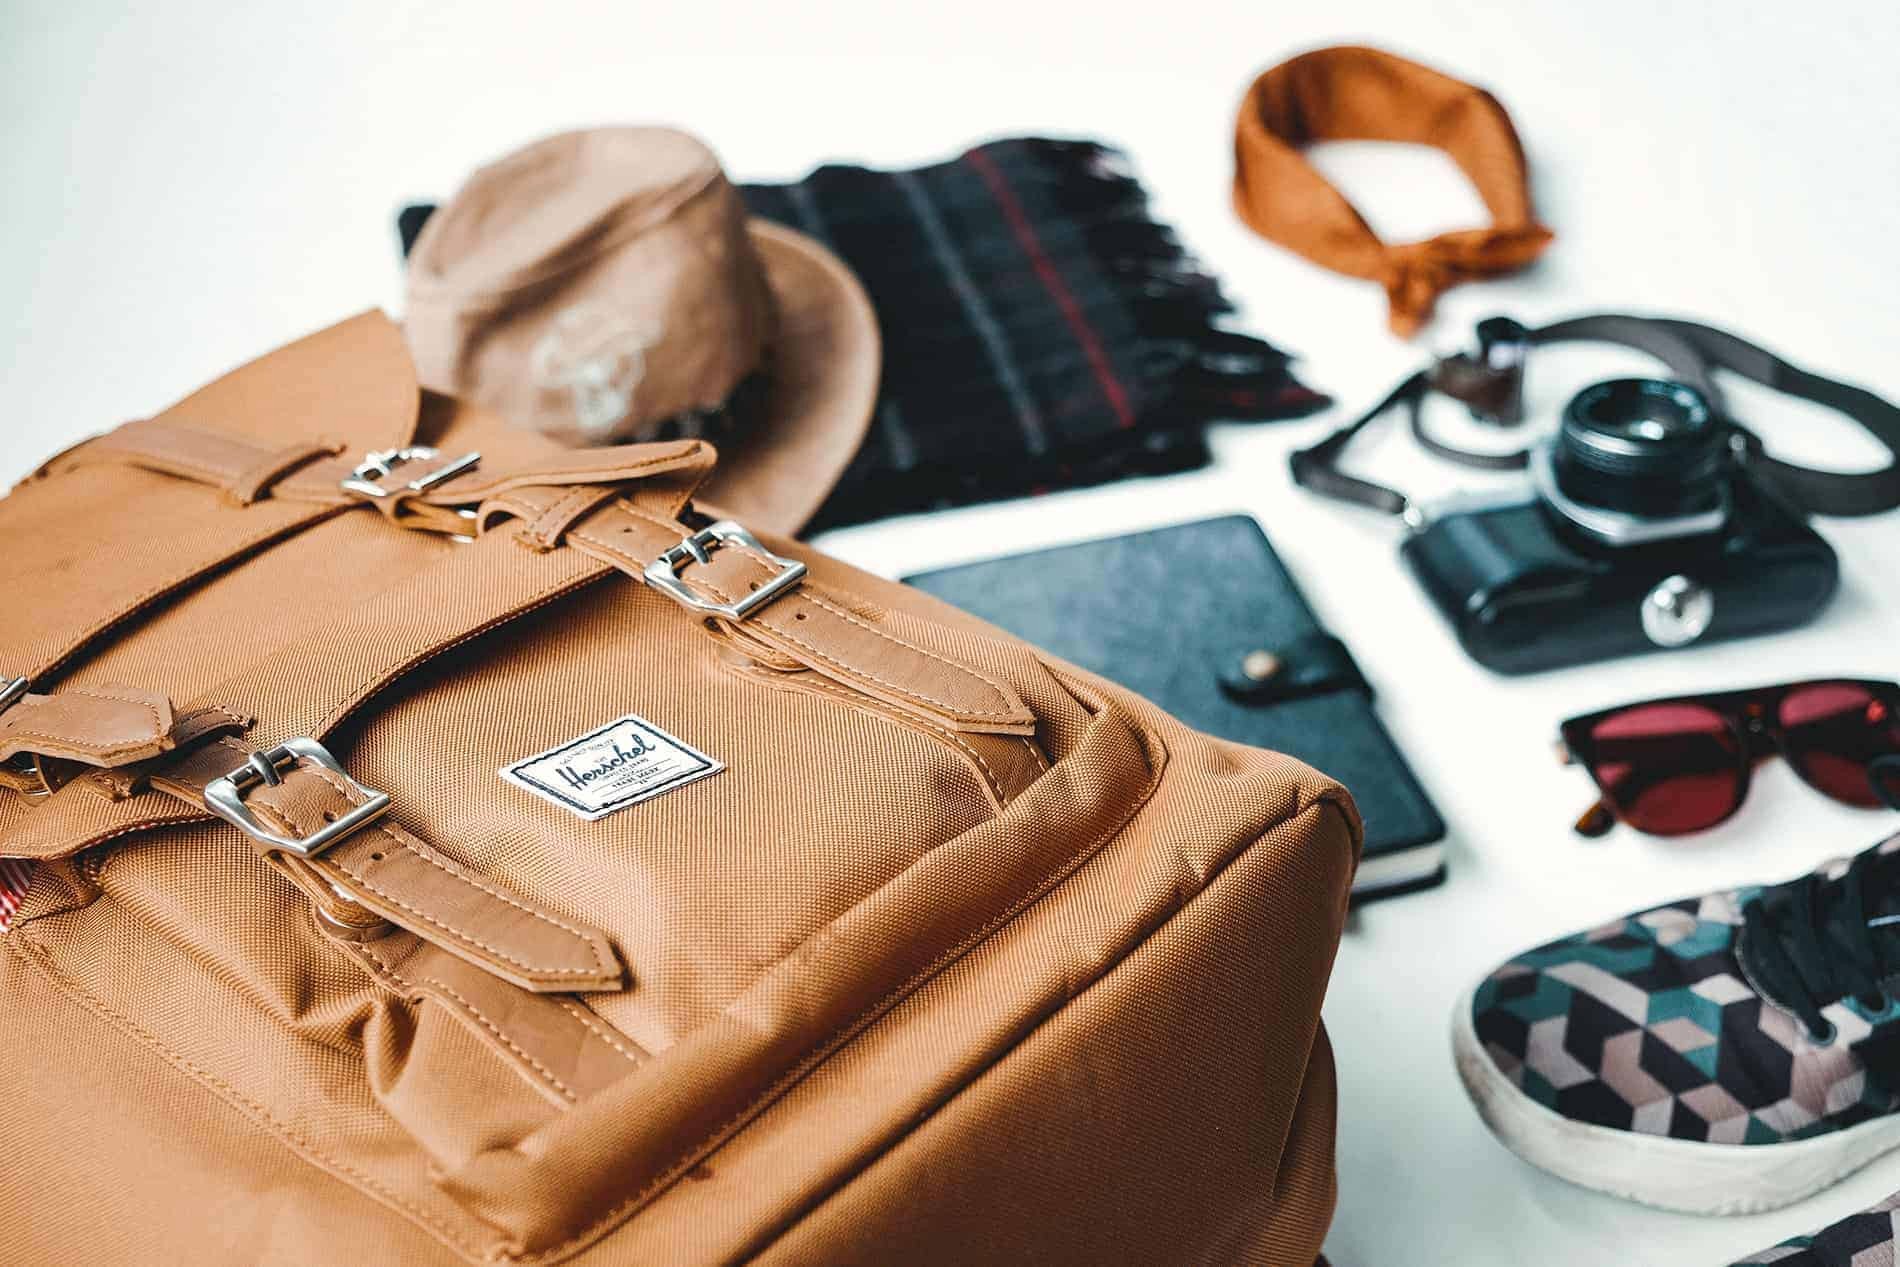 6 Helpful Luggage Accessories for Organized Travel